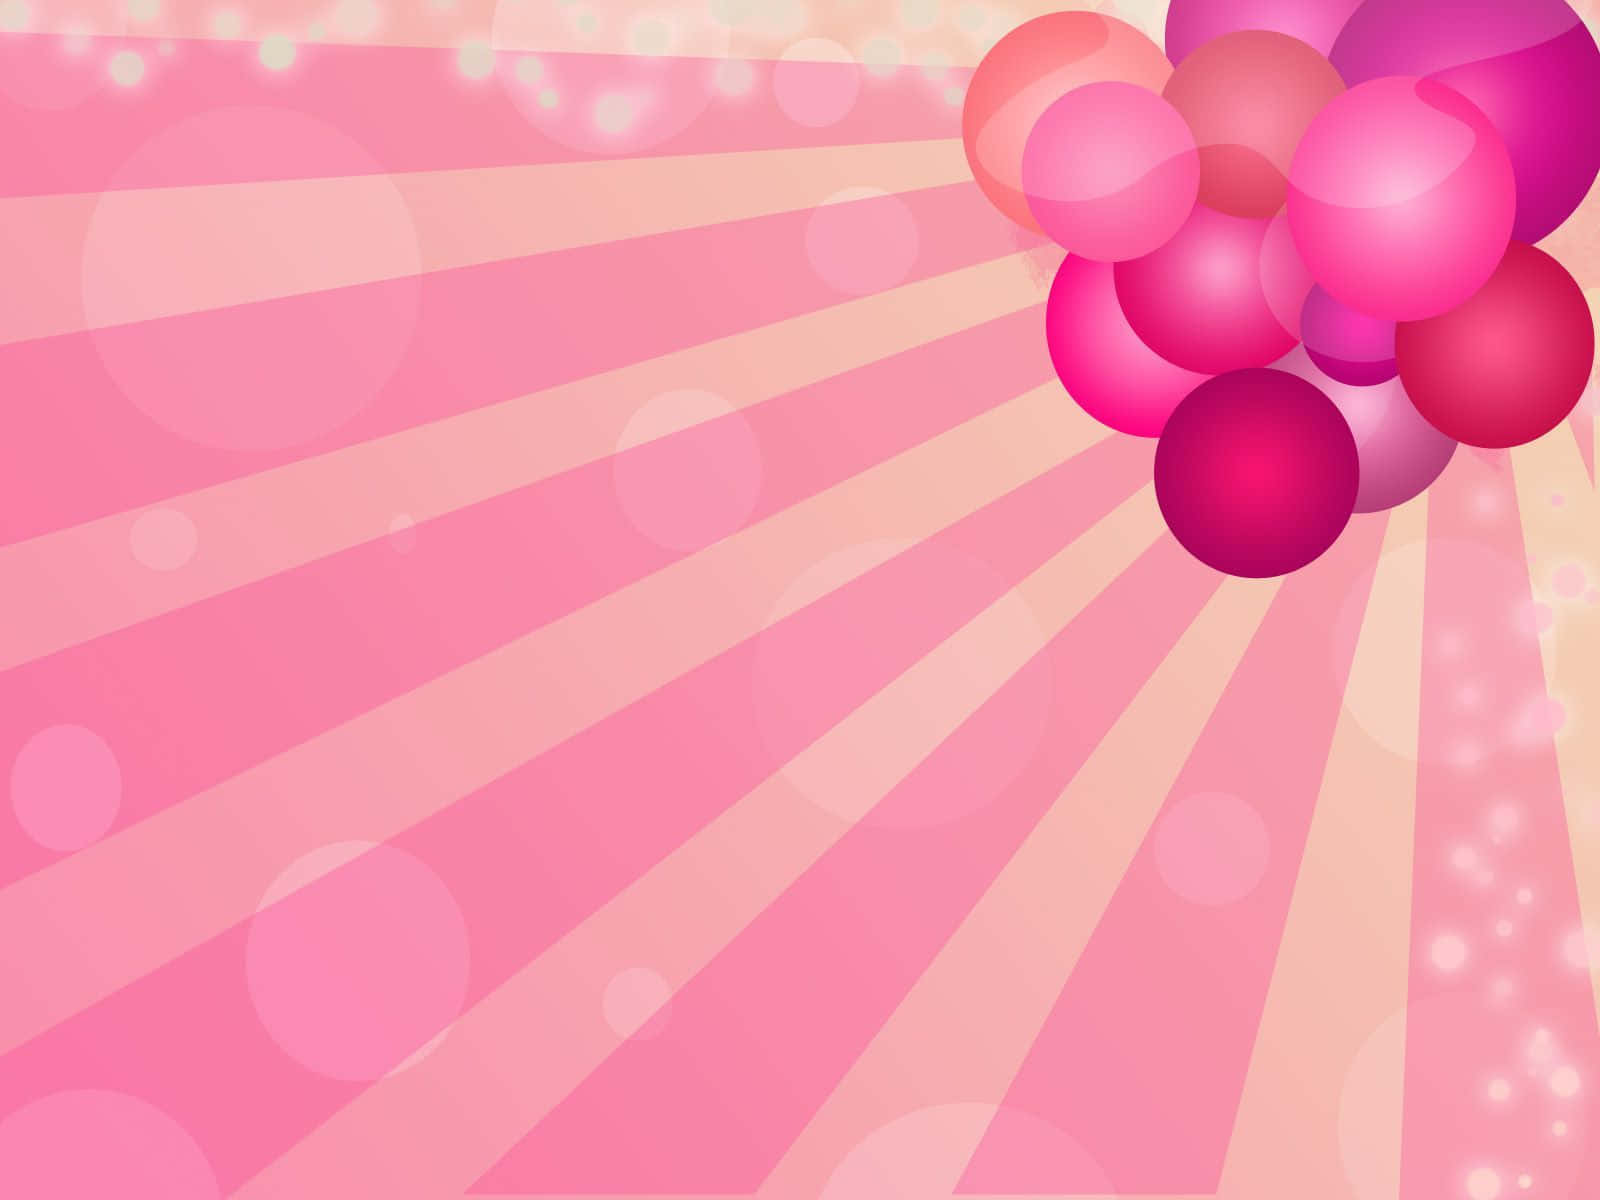 Brighten up your day with these Pink Balloons!